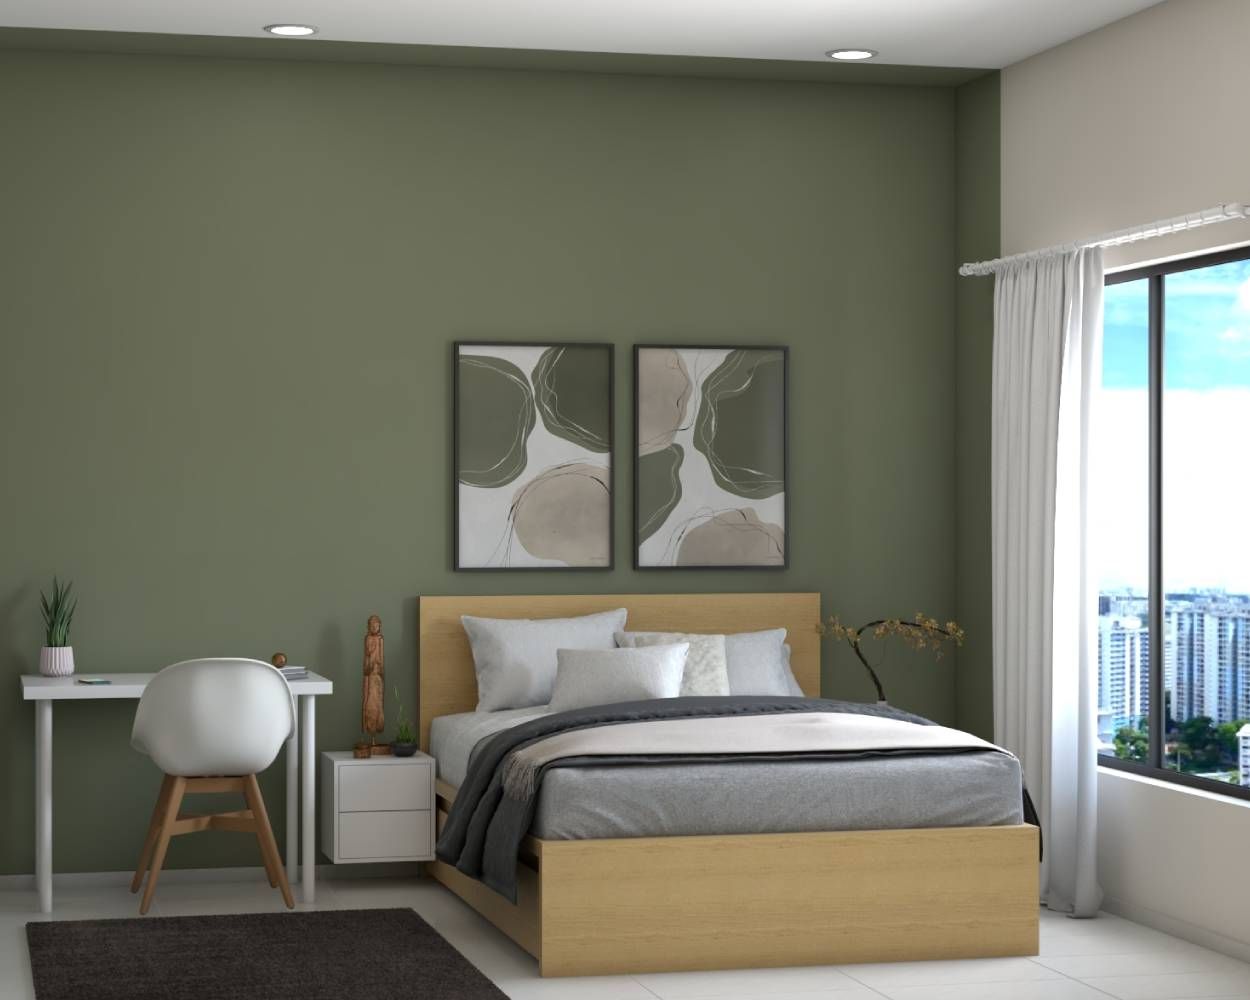 Contemporary Master Bedroom Design With Green Accent Wall And Wooden Bed